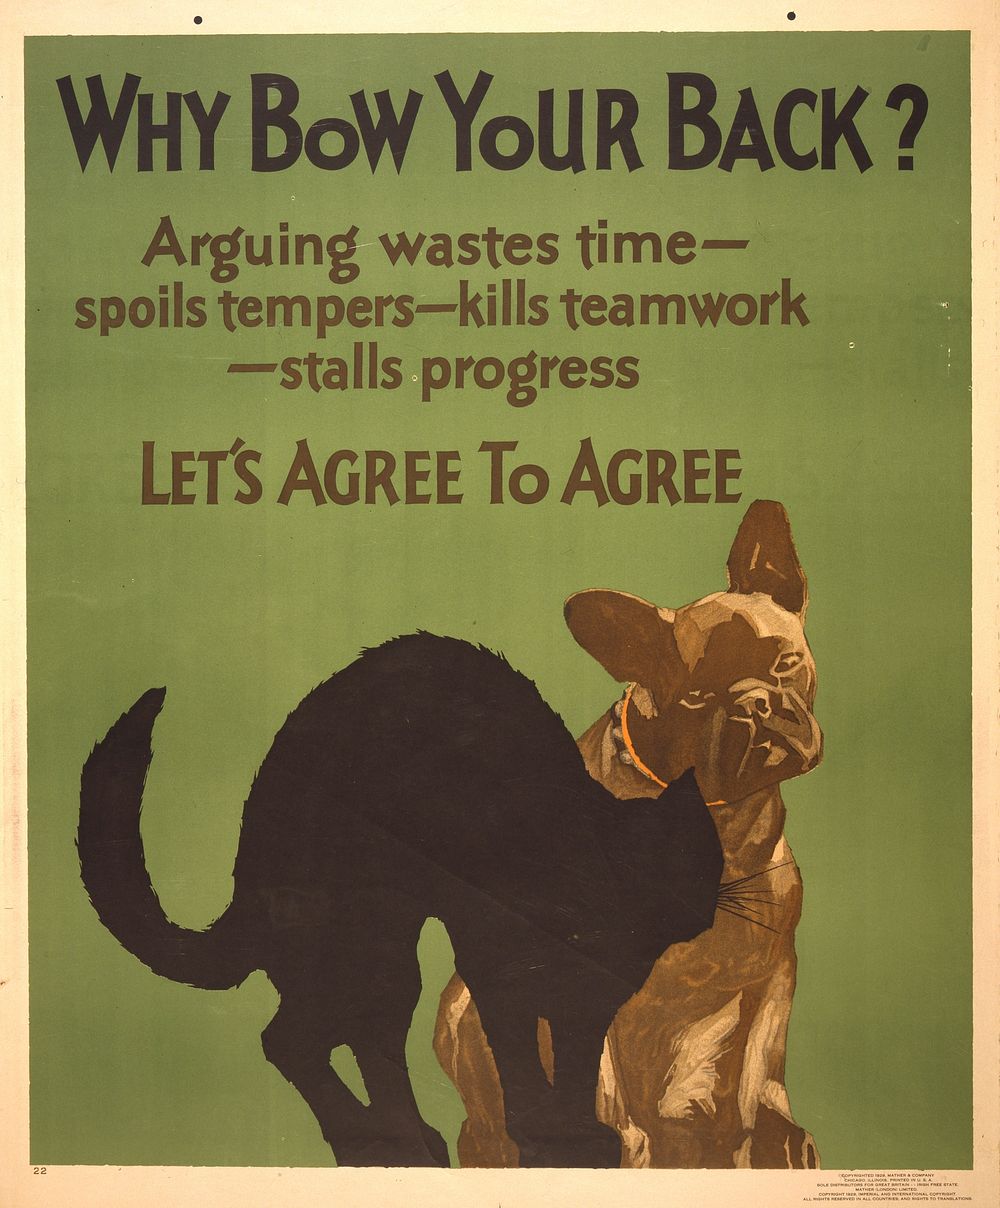 Why bow your back? Arguing wastes time -- spoils tempers -- kills teamwork -- stalls progress. Let's agree to agree.